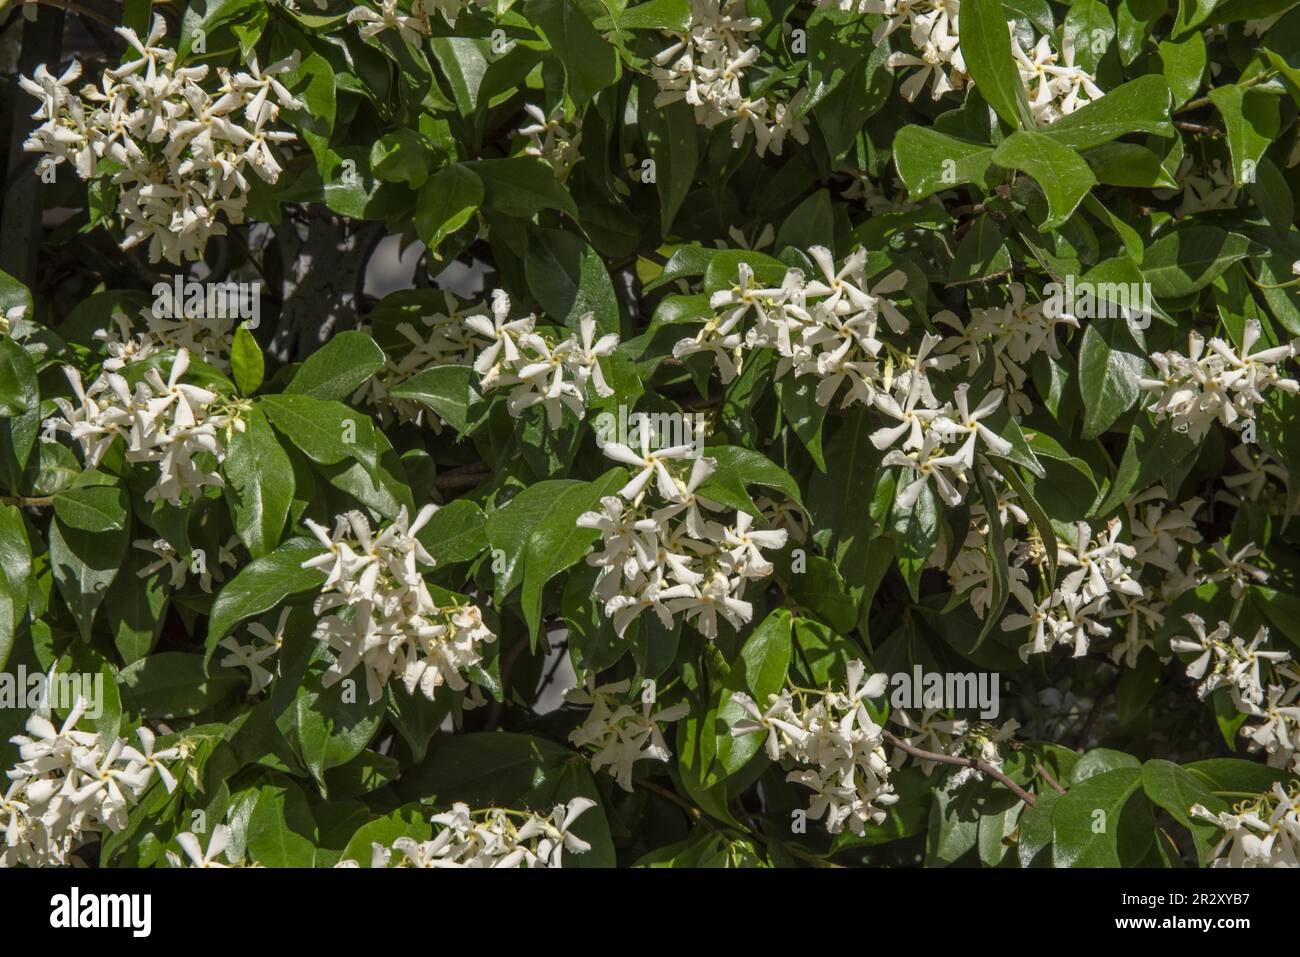 A hedge full of flowers in an urban garden with lots of green leaves Stock Photo